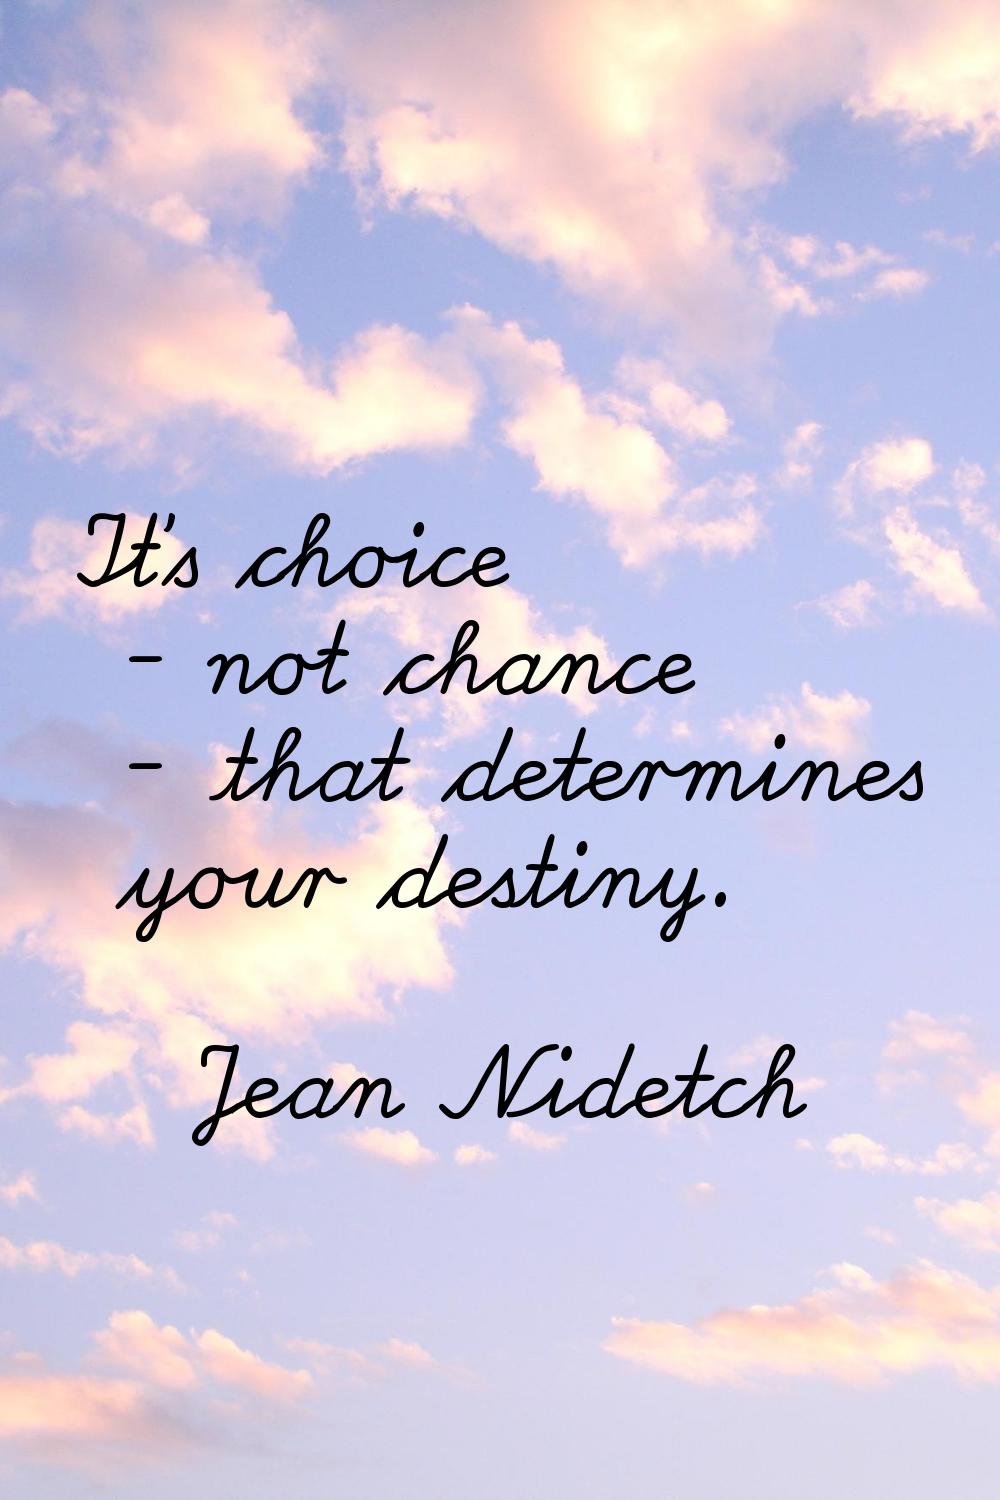 It's choice - not chance - that determines your destiny.